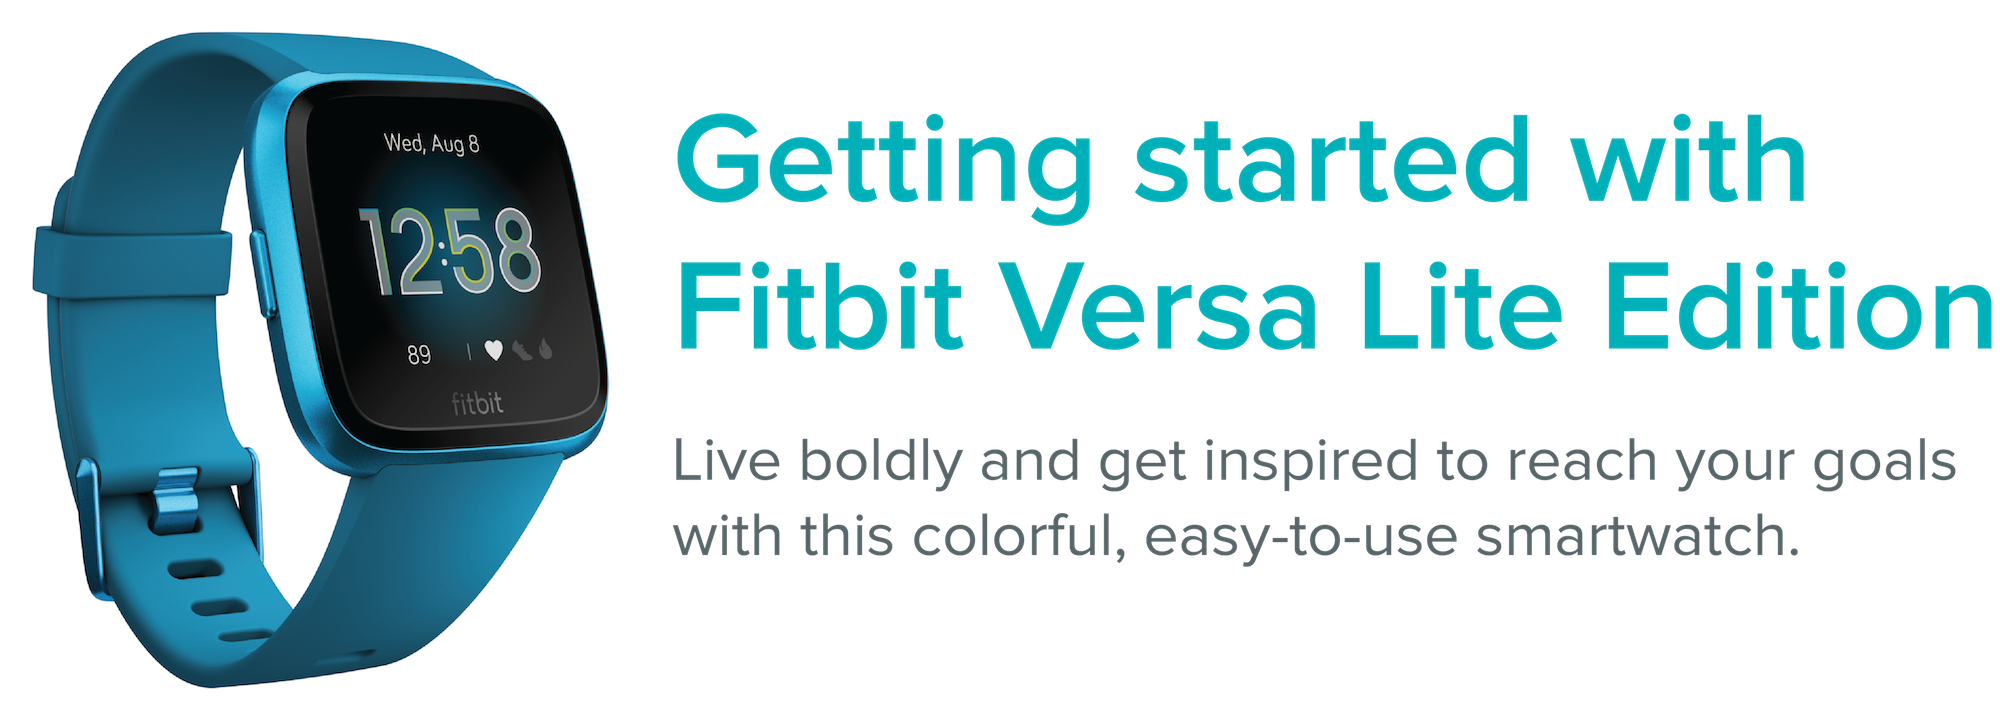 How I get started with Fitbit Versa Edition?